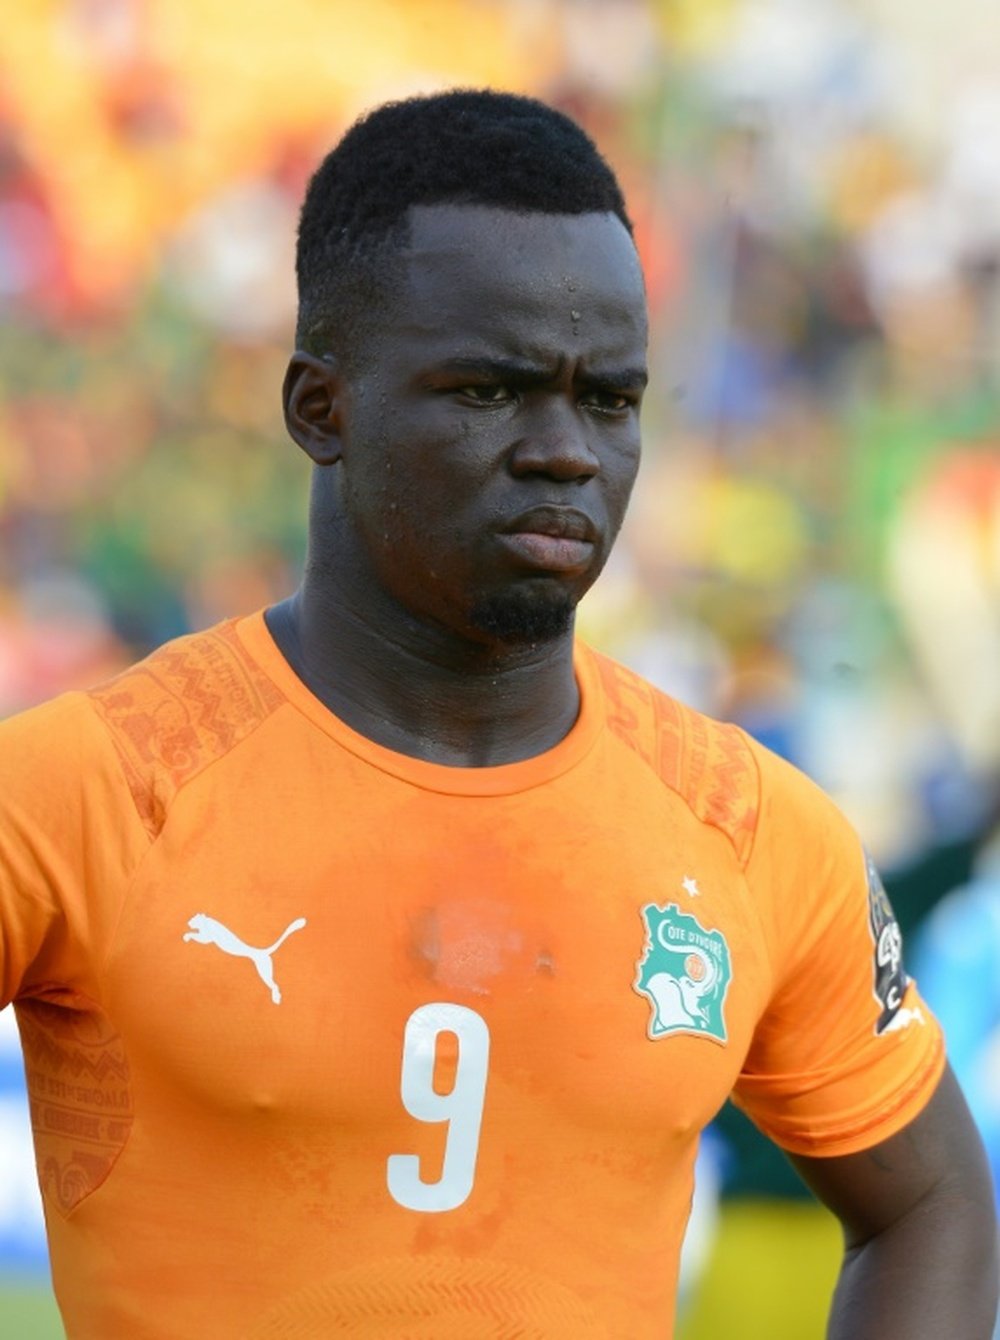 Cheick Tiote sadly passed away on Jun 5th 2017. AFP